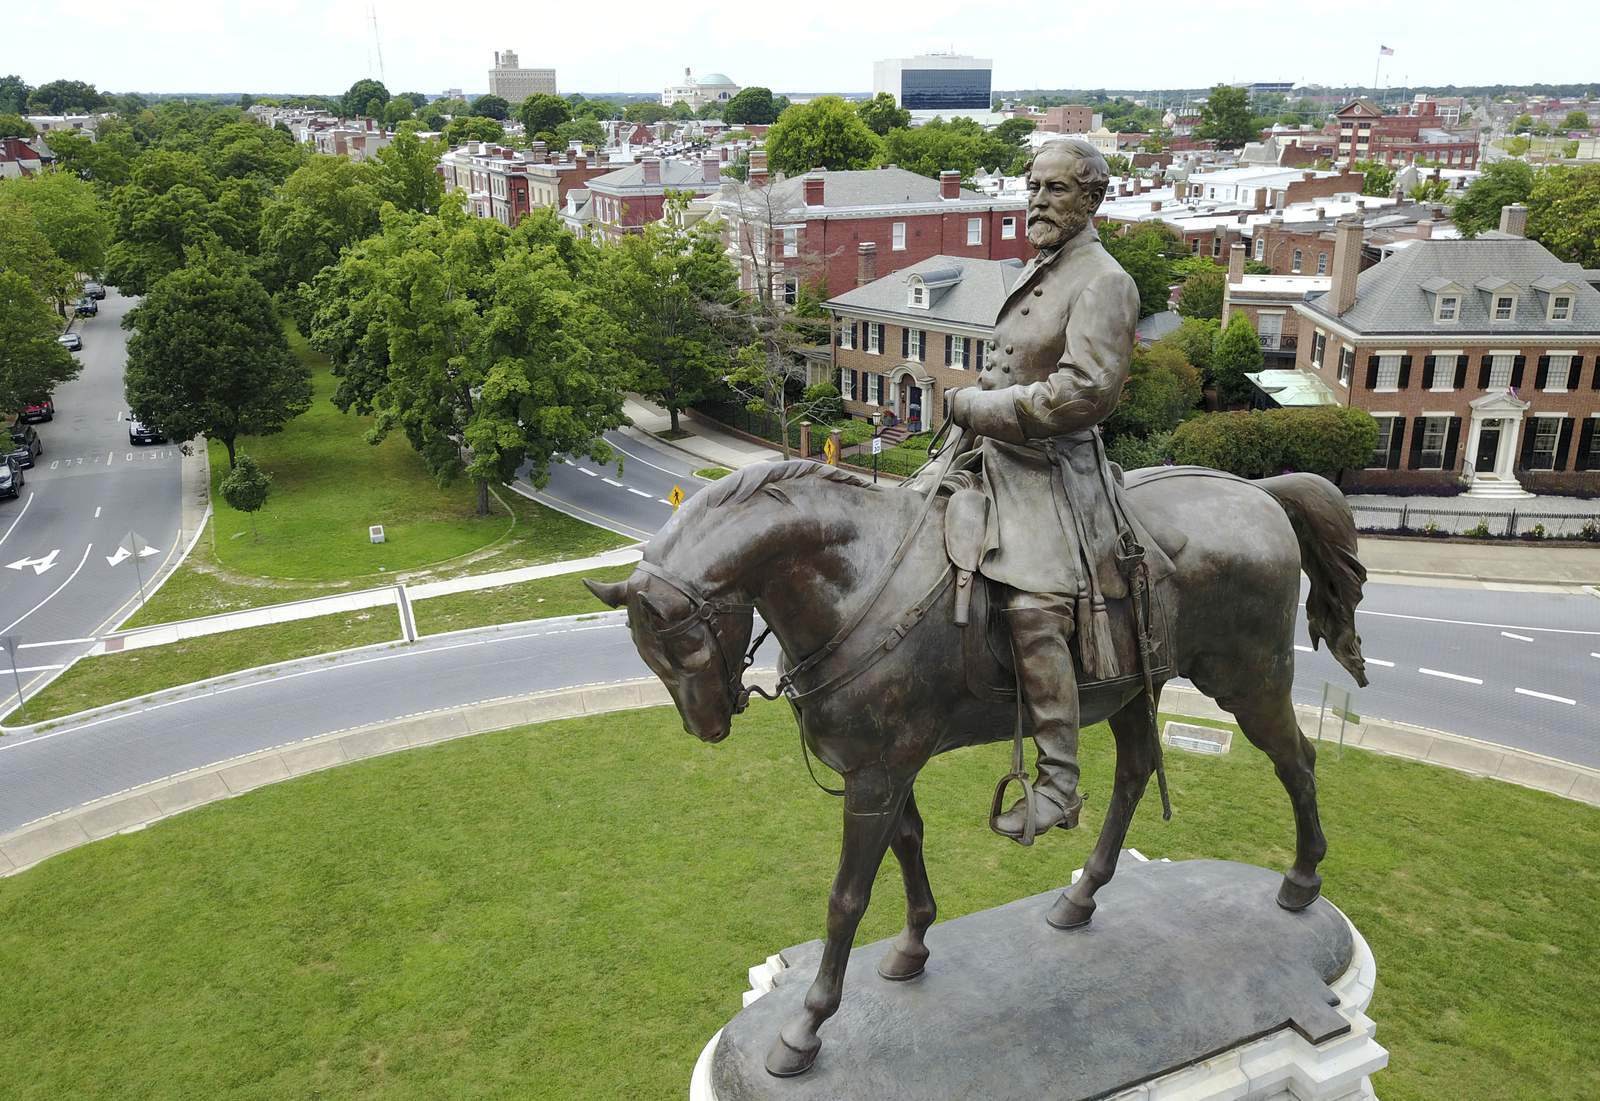 No immediate ruling on motion to dismiss Robert E. Lee statue lawsuit